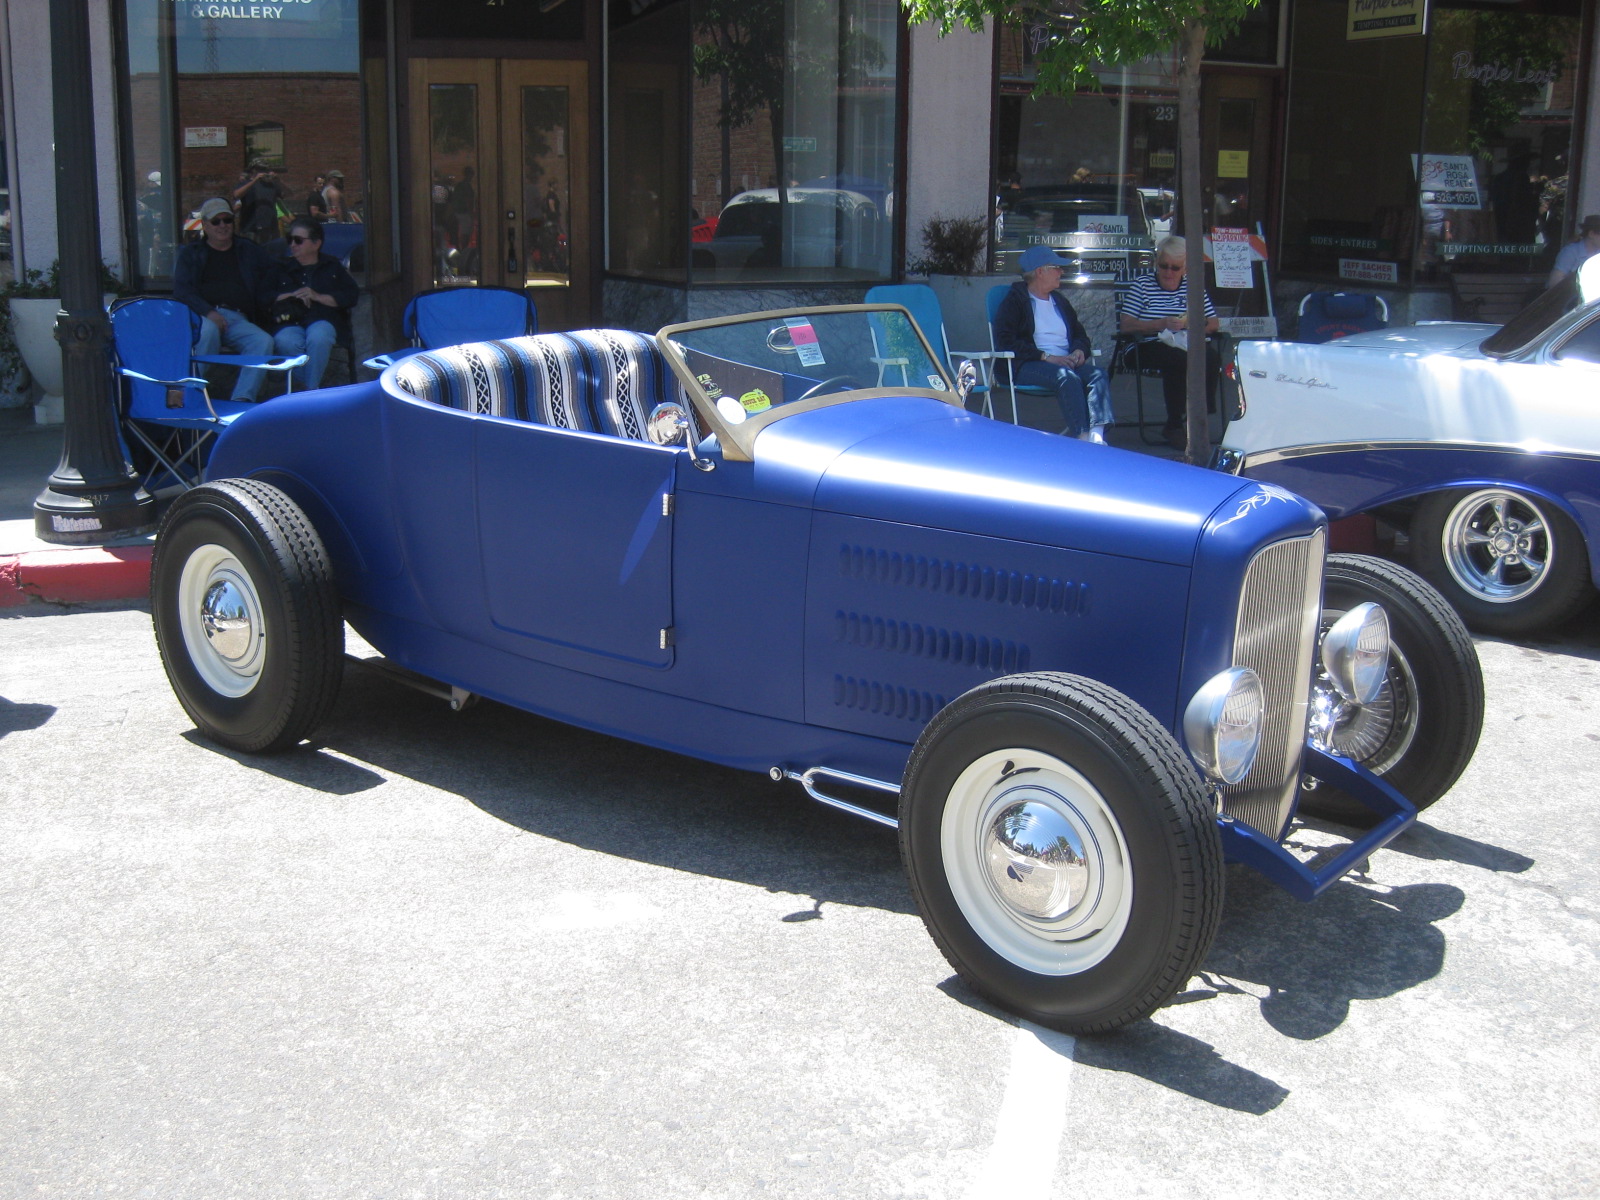 blue 1926 ford model T hot rod roadster - the blue suede shoe 